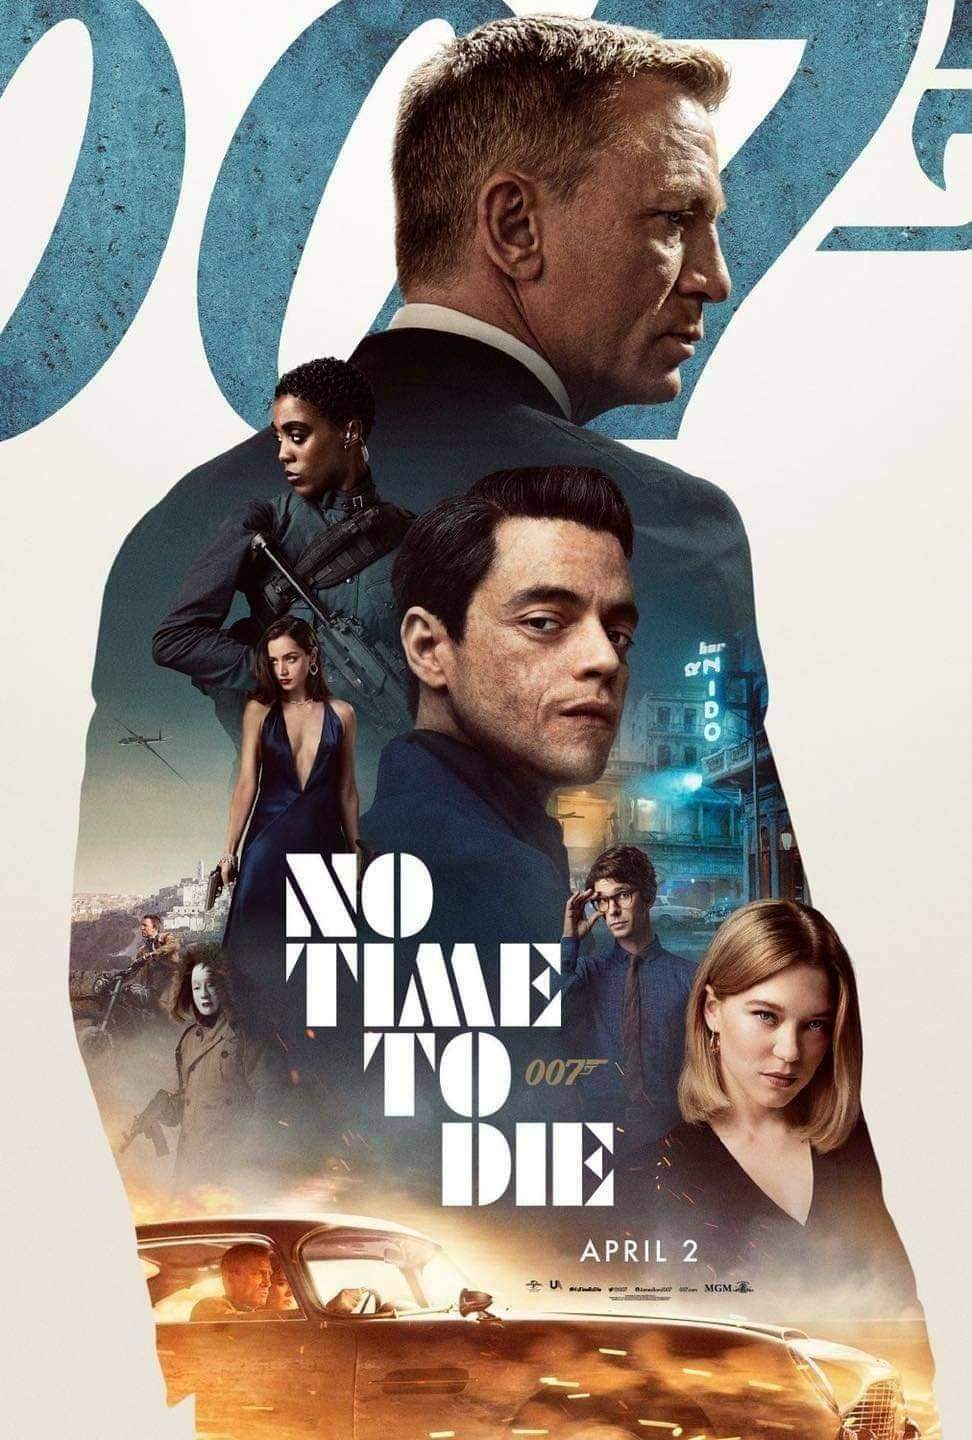 anticipated movies 2021 - no time to die film poster - On 00T No Time TO007 Die 0077 April 2 mm Mgm